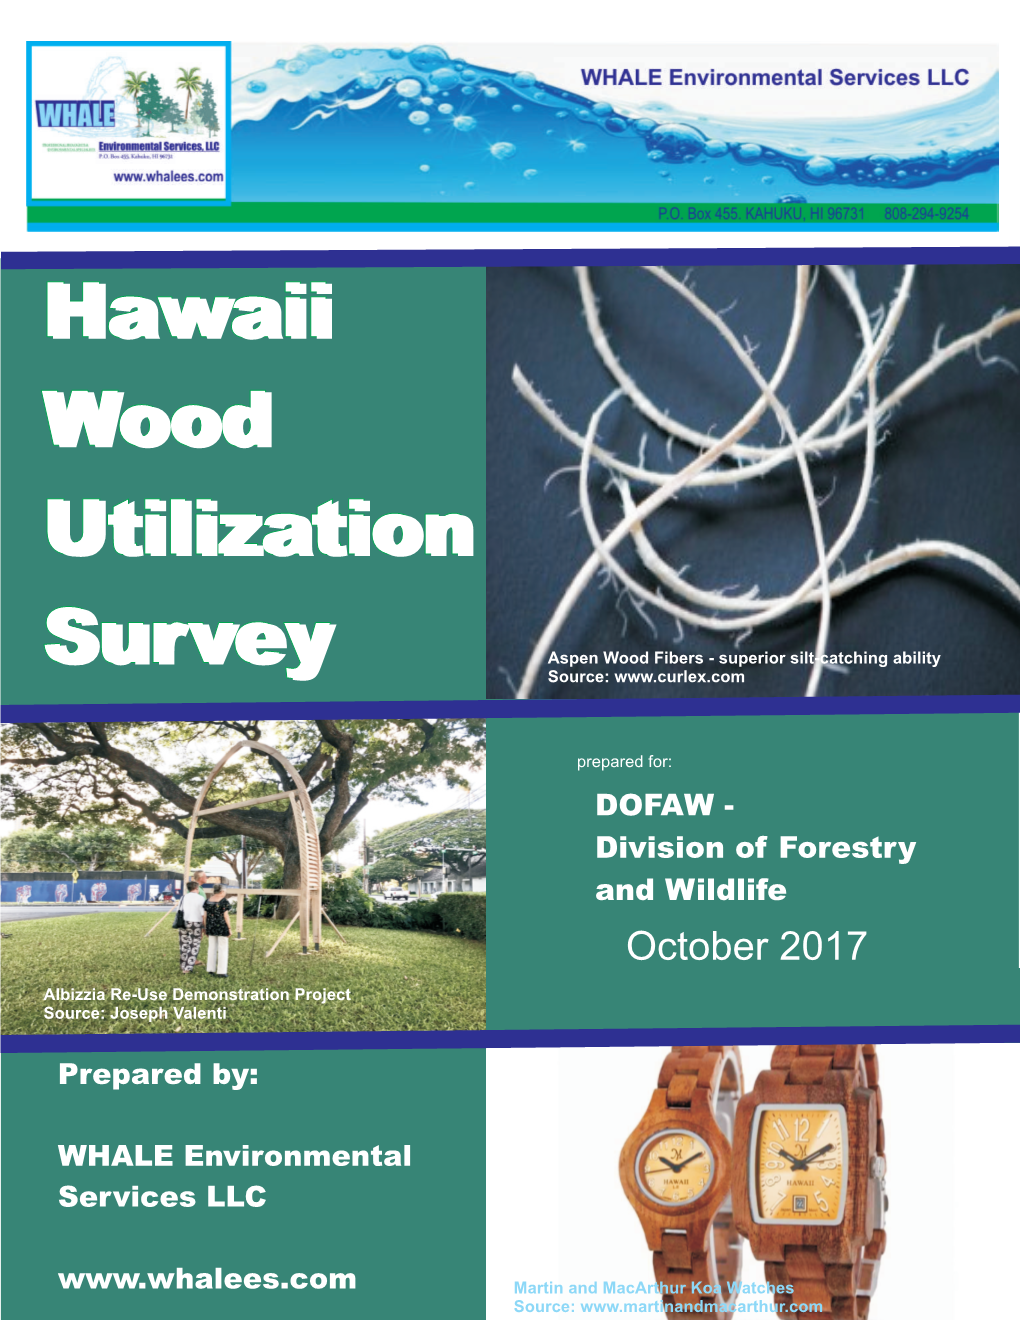 Wood Utilization Survey Report and the Co-Owner of WHALE Environmental Services LLC